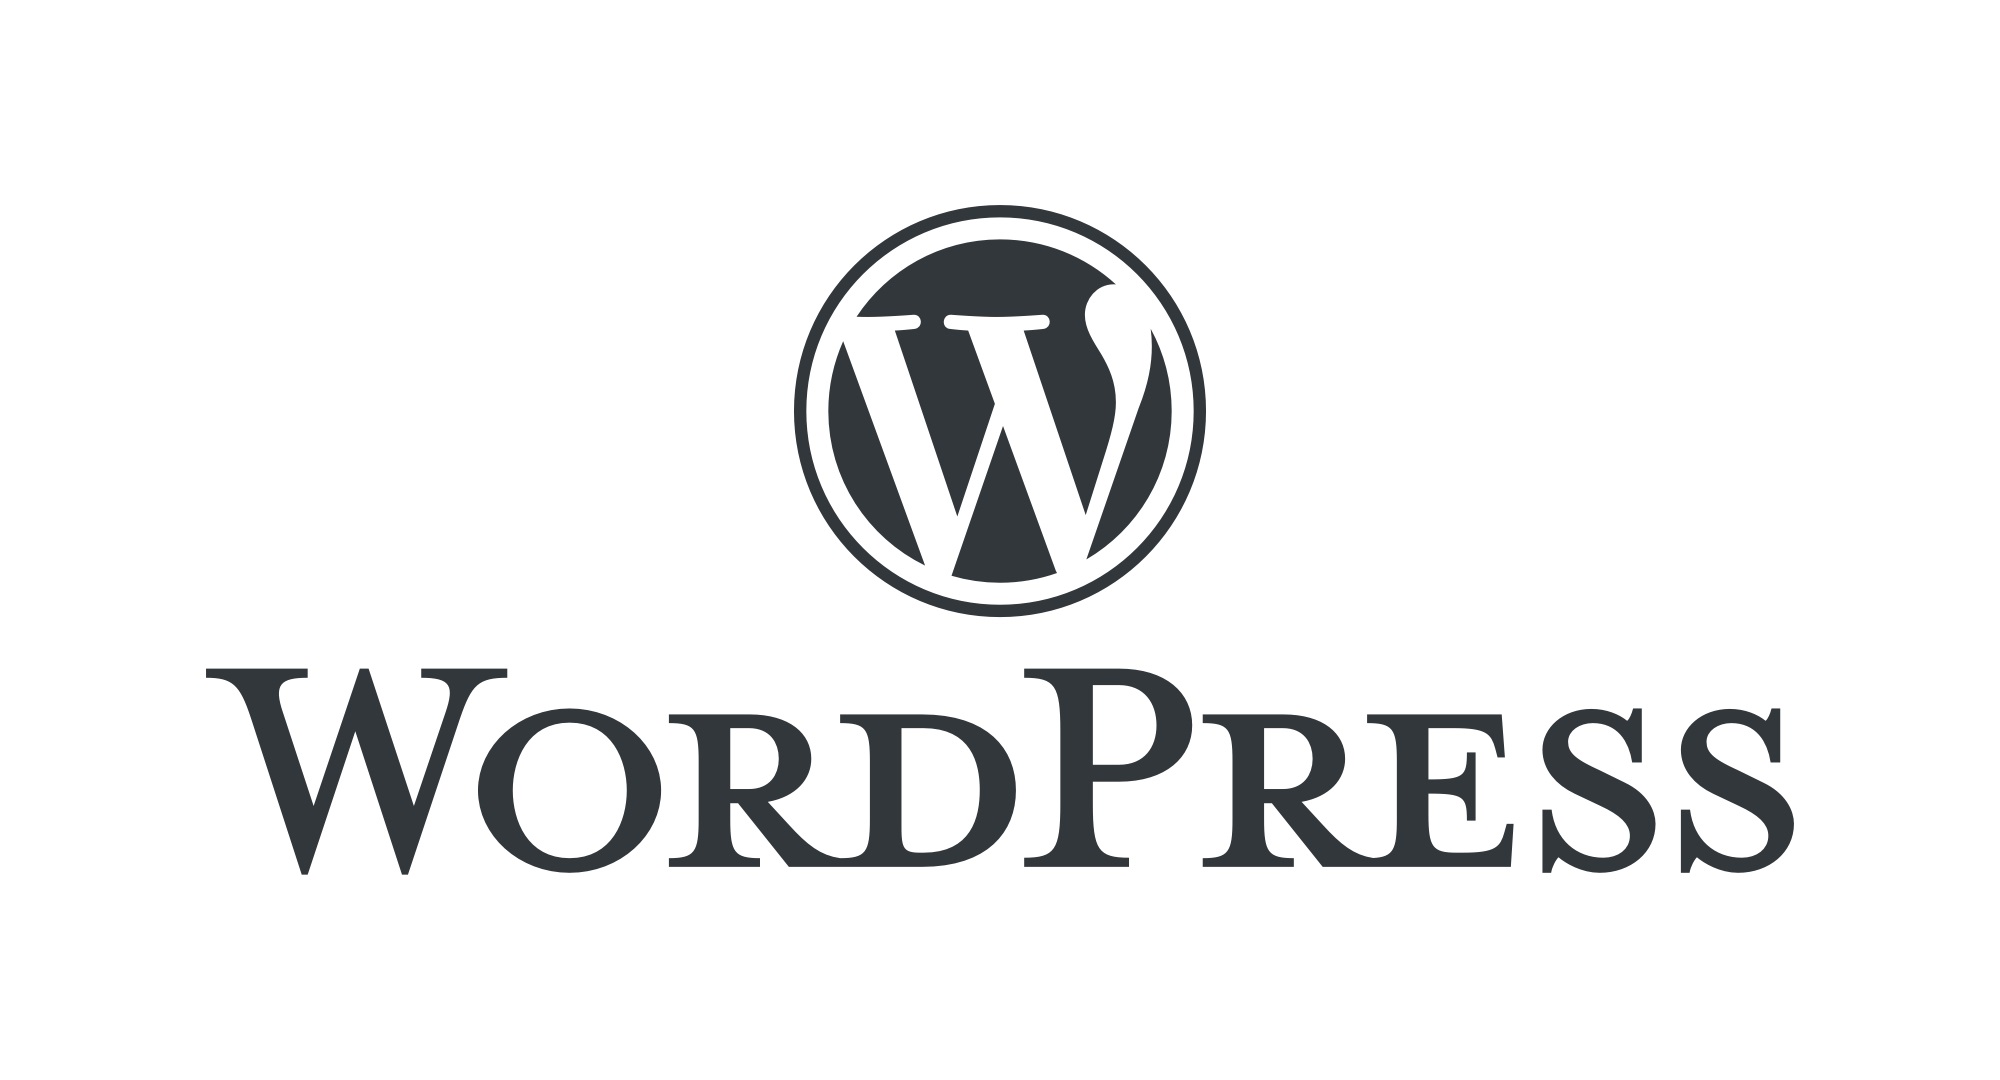 What is the advantage and disadvantage of the wordpress platform?